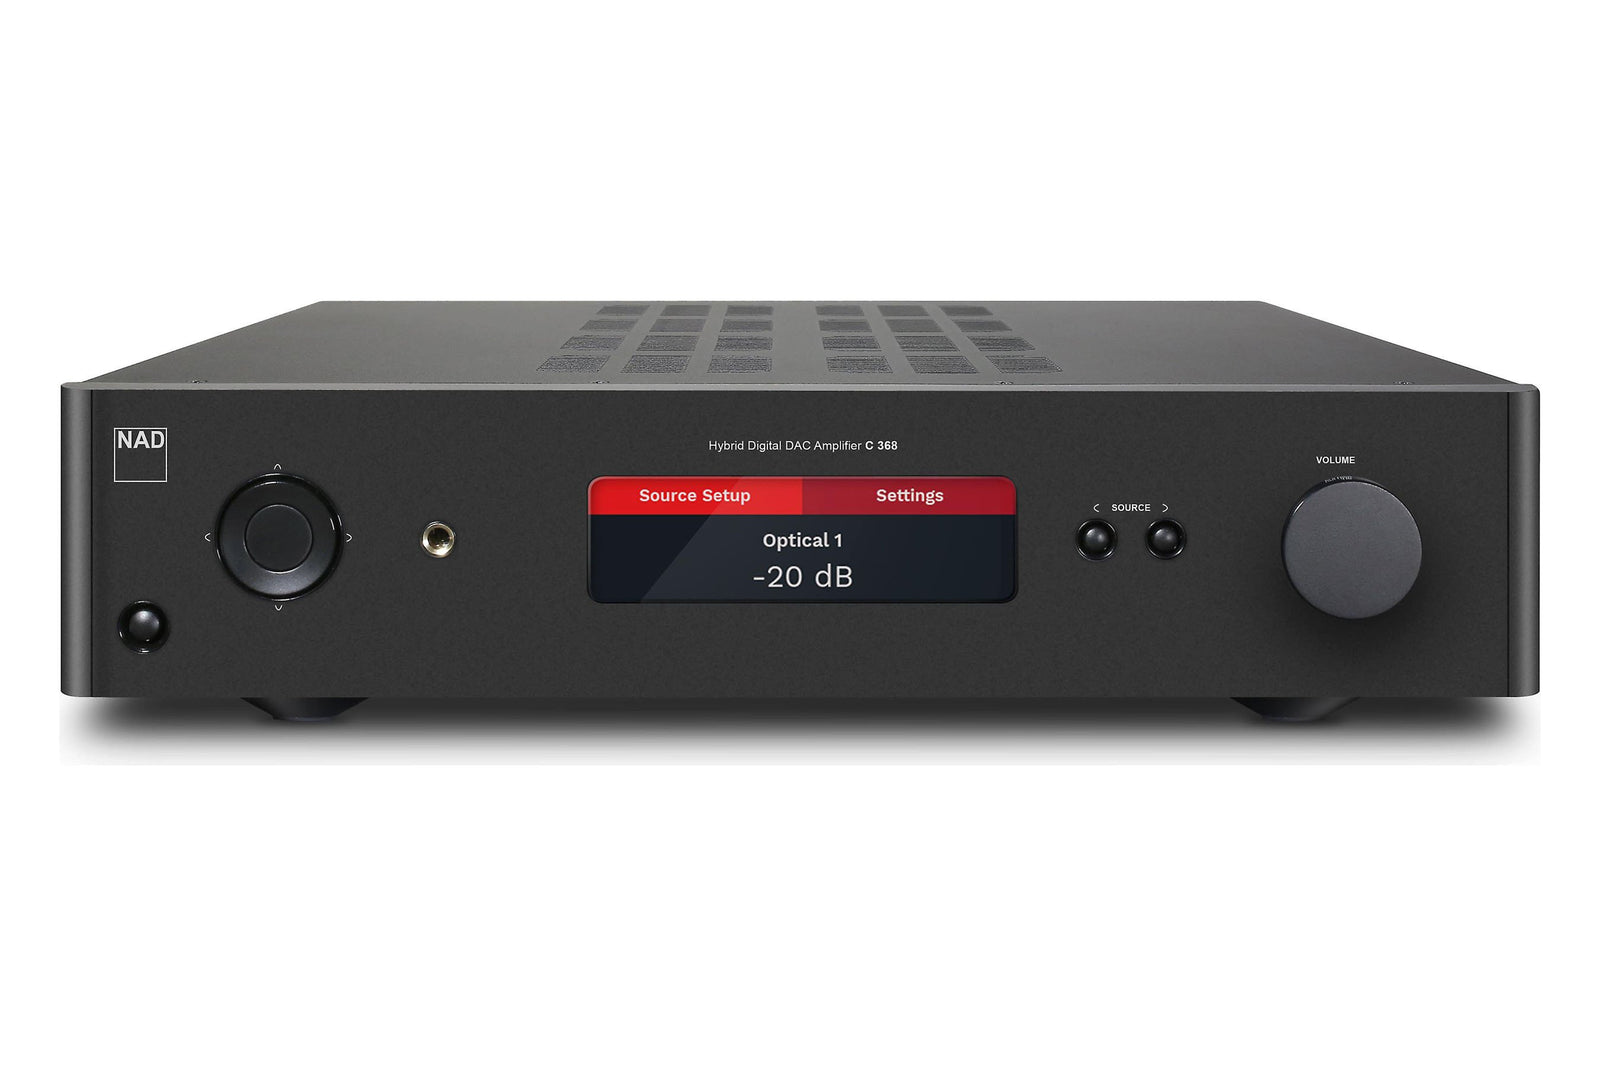 NAD C 368 INTEGRATED AMPLIFIER - Best price on all NAD Electronics High Performance Hi-Fi and Home Theatre at Vinyl Sound, music and hi-fi apps including AV receivers, Music Streamers, Amplifiers models C 399 - C 700 - M10 V2 - C 316BEE V2 - C 368 - D 3045..., NAD Electronics Audio/Video components for Home Theatre products, Integrated Amplifiers C 700 NEW BluOS Streaming Amplifiers, NAD Electronics Masters Series…